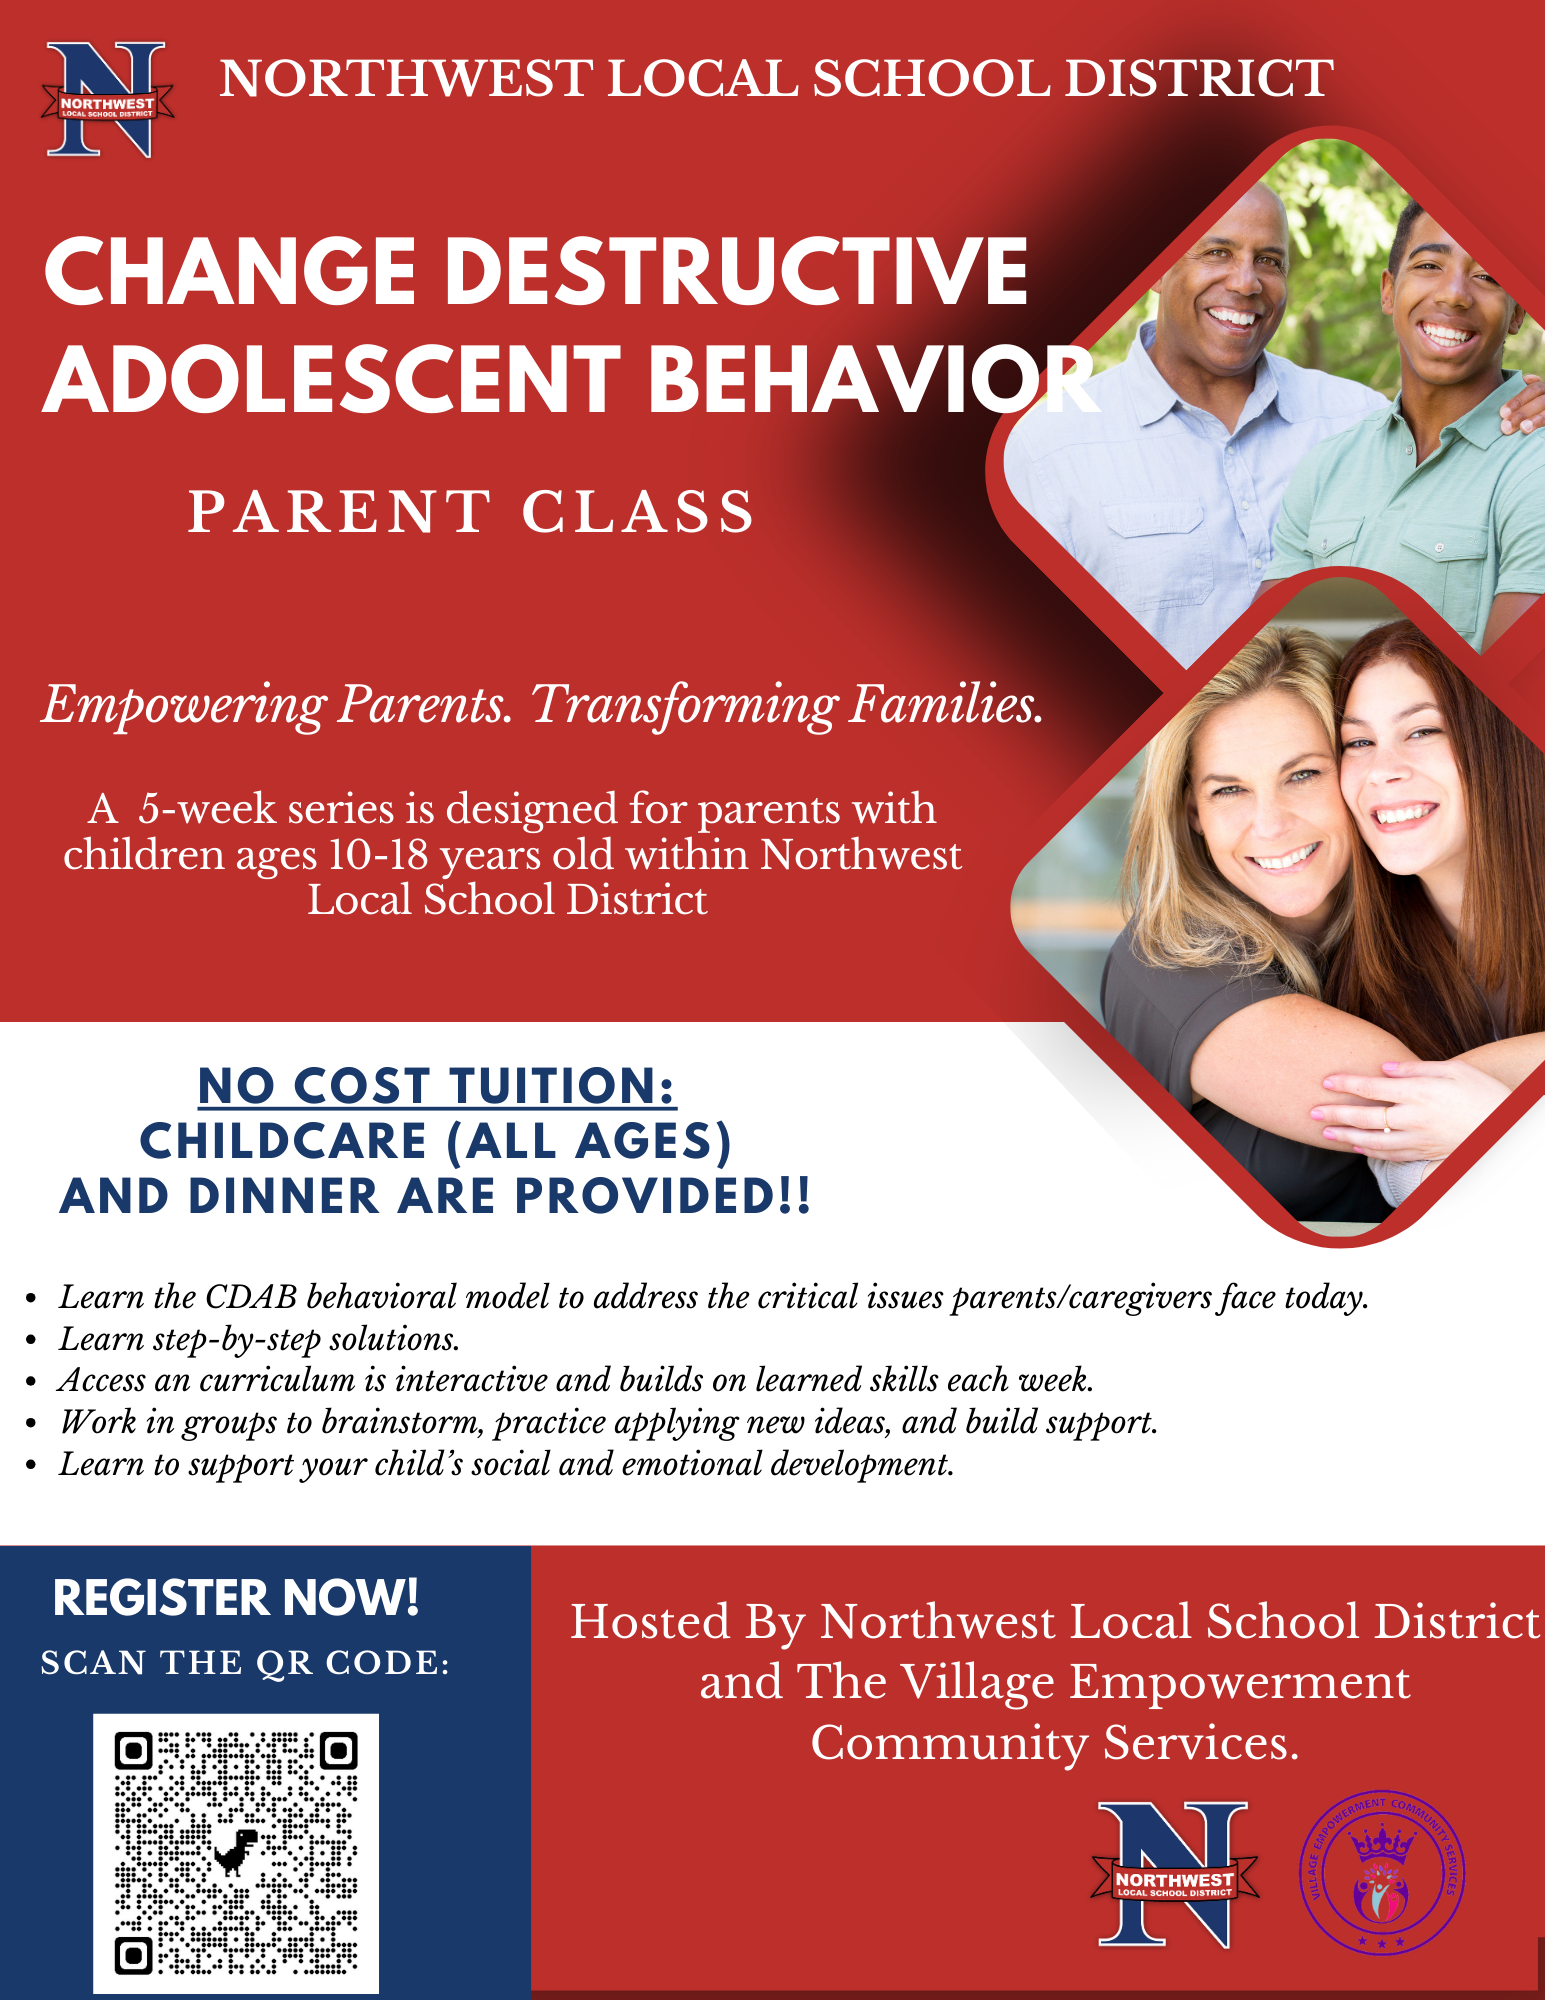 Northwest Local School District (NWLSD) is partnering with Village Empowerment Community Services (VECS) organization for a fourth school year, to offer an intensive 5-week long parenting class. A Parent’s Guide to Changing Destructive Adolescent Behavior (CDAB) is the only parent training program that addresses the MOST destructive of adolescent behaviors such as: chronic school truancy, running away from home, taking unhealthy risk, and but not limited to thoughts of experimenting or experimenting with drugs and/or alcohol.   This program uses the CDAB behavioral model to address the critical issues parents/caregivers face today and offers step-by-step solutions.  The curriculum is interactive and builds on learned skills each week. Parents/caregivers will be given the opportunity to work in groups to brainstorm, practice applying new ideas, and build support. Strategies learned in the group will better prepare parents/caregivers to support their child’s social and emotional development. Our hope is to empower parents and to positively transform families.   The program is completely FREE and is open to all parents who reside in the NWLSD community and have children between 10 -18 years of age.  Participation is mandatory and classes will be closed after the second week. Childcare (all ages) and dinner will also be provided for FREE on a weekly basis.   Families that participate in these workshops will:  • Learn ways to reduce family conflict  • Increase students school attendance rates • Help students improve school performance • Find resources to help your family